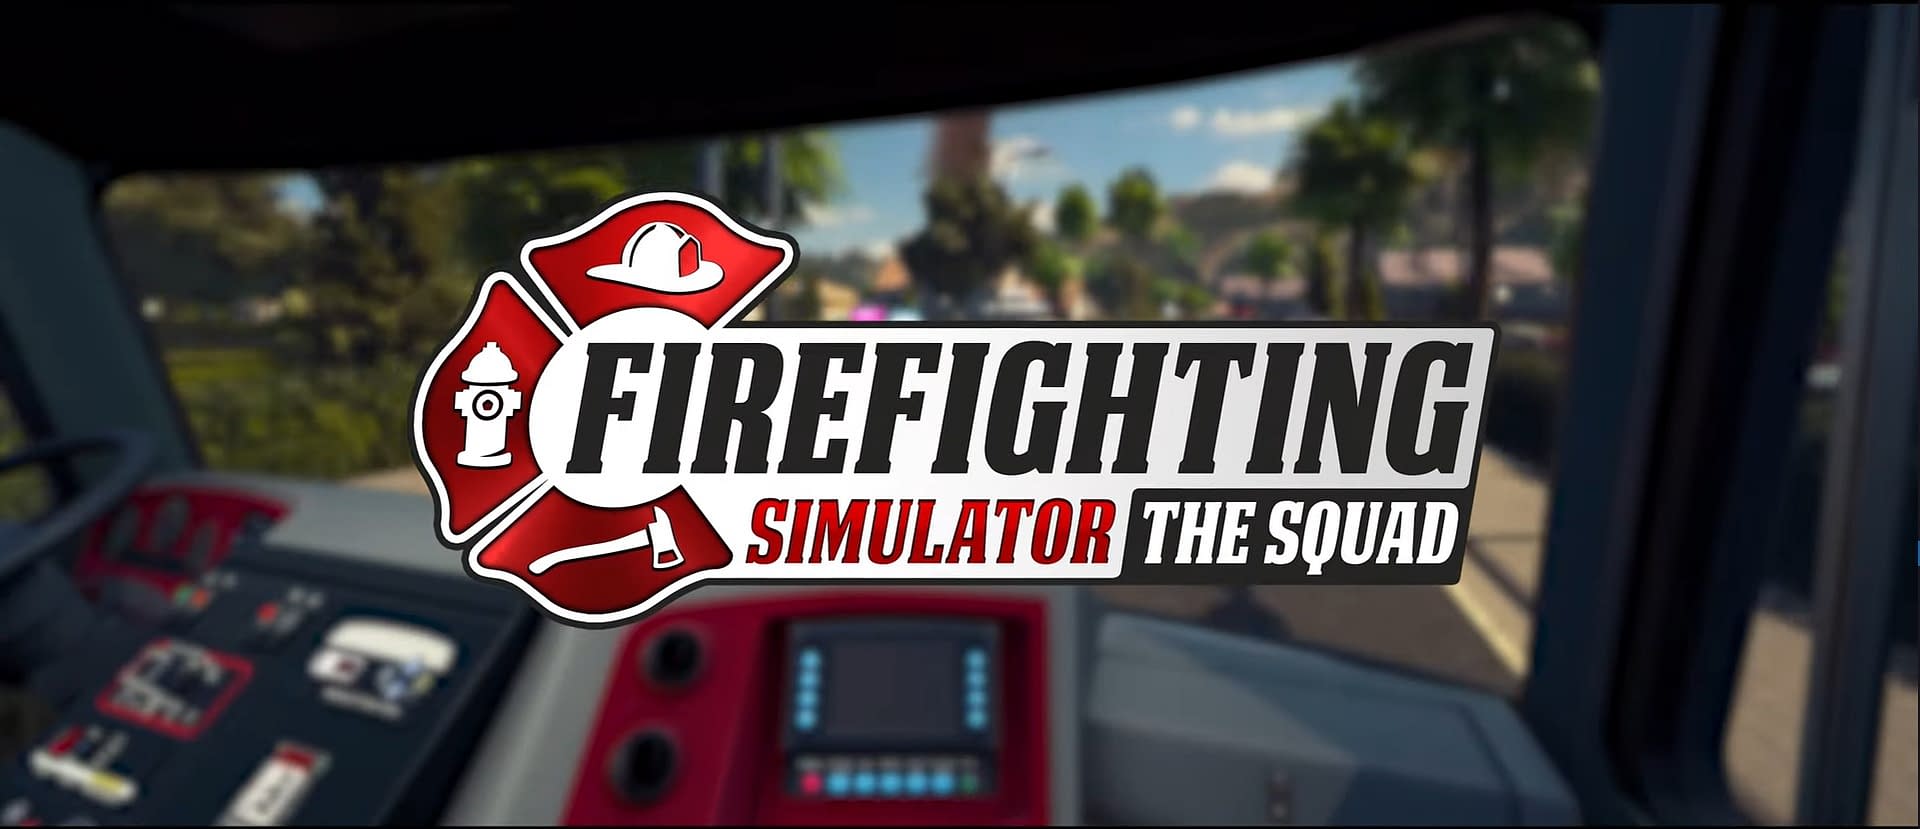 Firefighting Simulator – The Squad Consoles On To Arrive